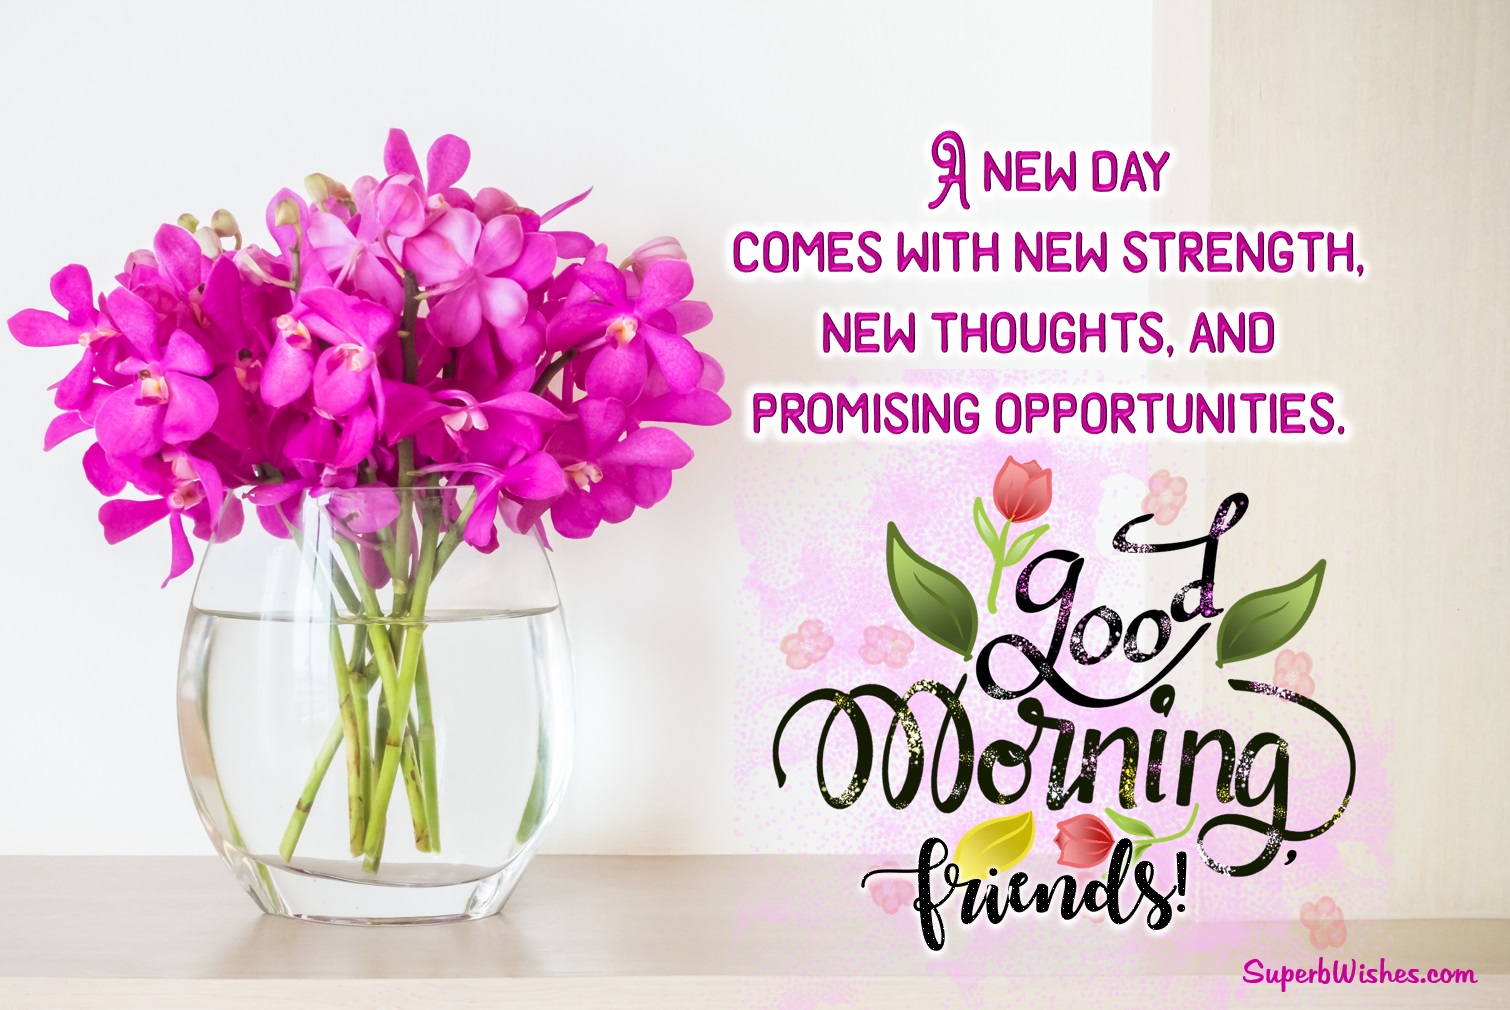 Good Morning Wishes For Best Friends. Superbwishes.com